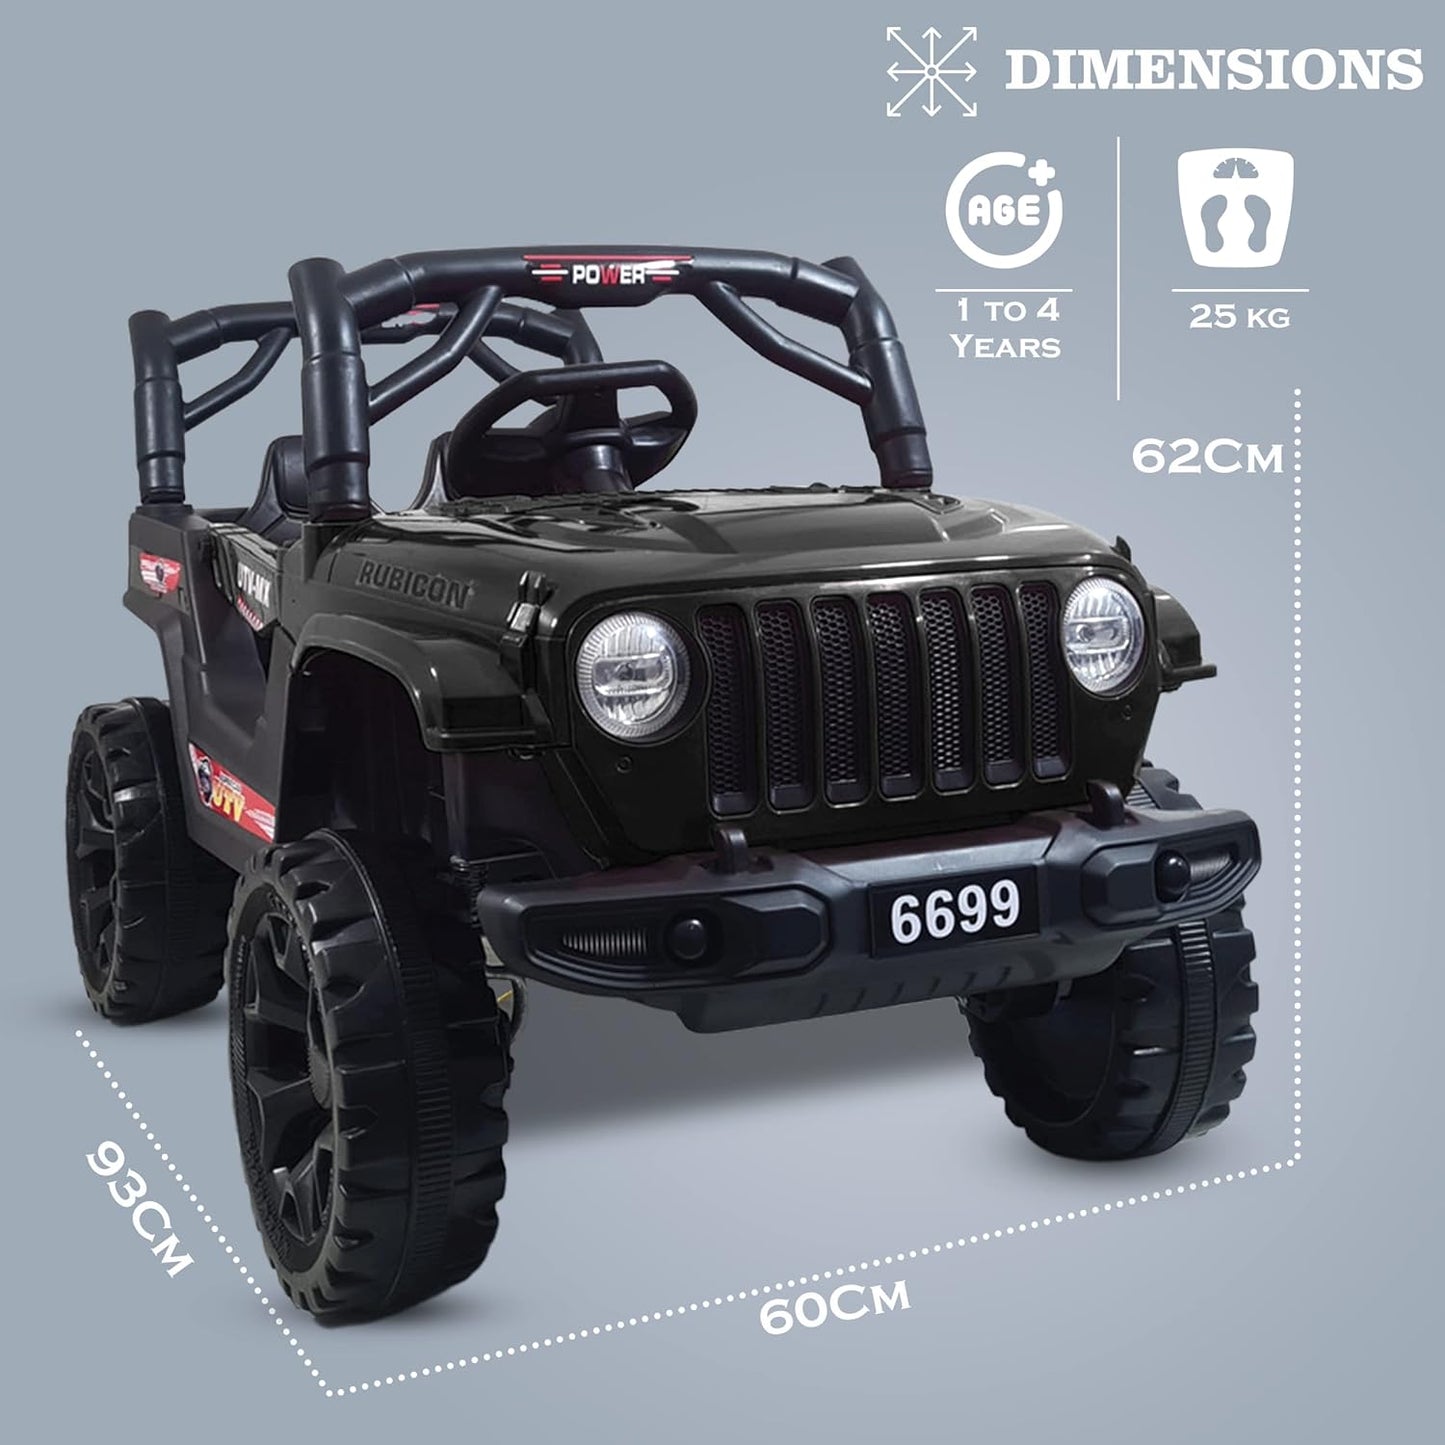 GettBoles 908 Electric Ride on Jeep for Kids with Music, Led Lights, Swing, Bluetooth Remote and 12V Battery Operated Car for1 to 4 Years Children to Drive (Metallic Black